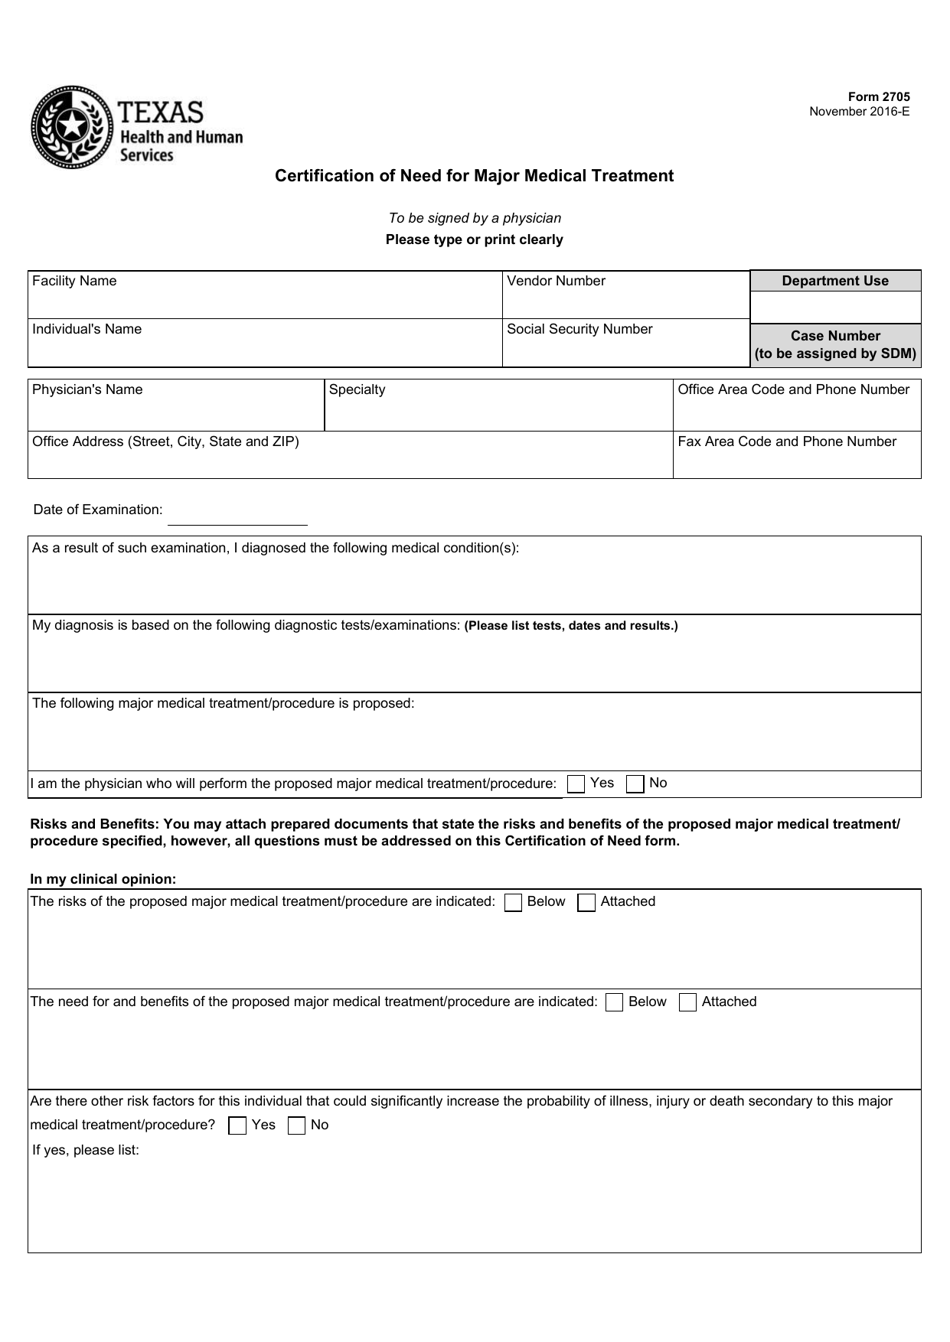 Form 2705 Certification of Need for Major Medical Treatment - Texas, Page 1